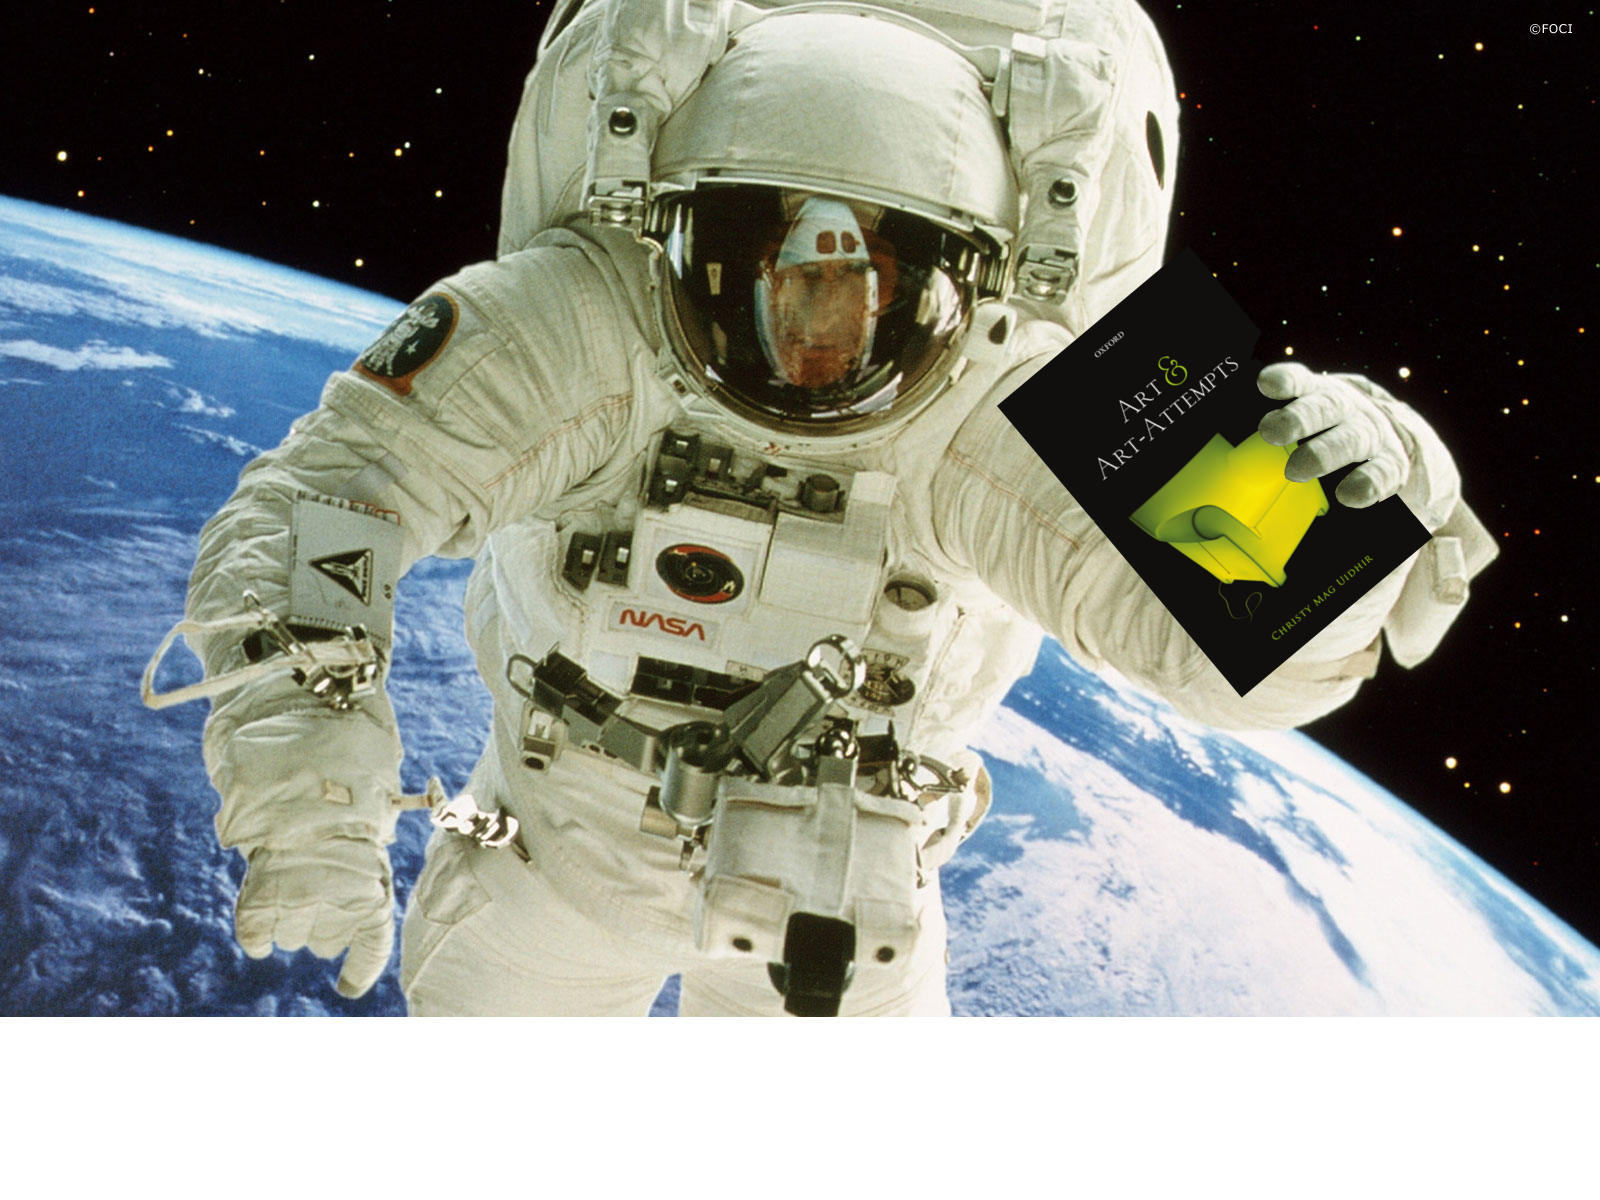 Astronaut holding copy of "Art and Art Attempts"